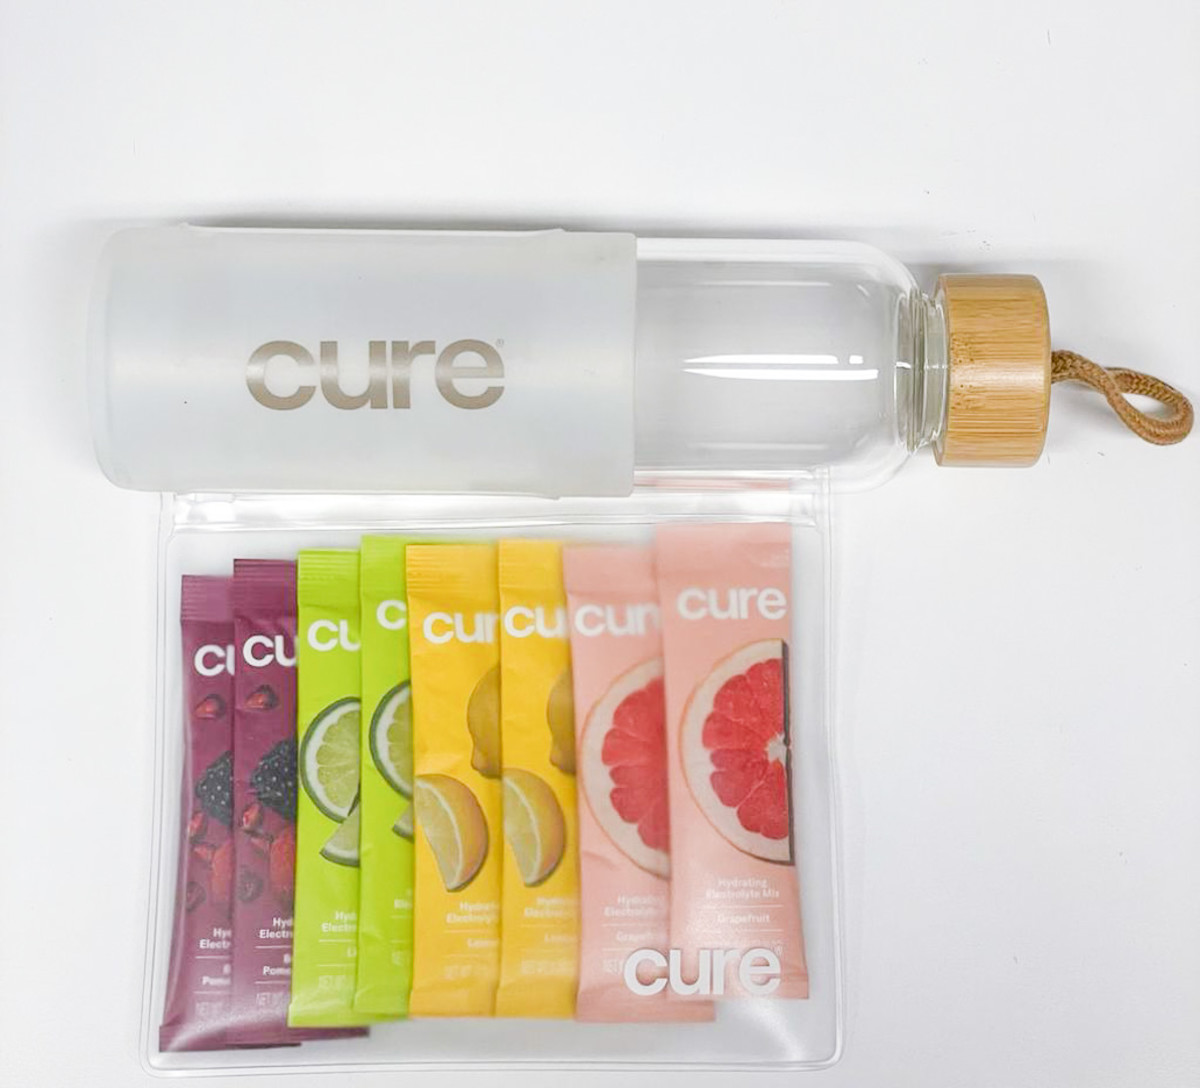 Shop products by Cure: Hydrating Electrolyte Mix ($17.99)